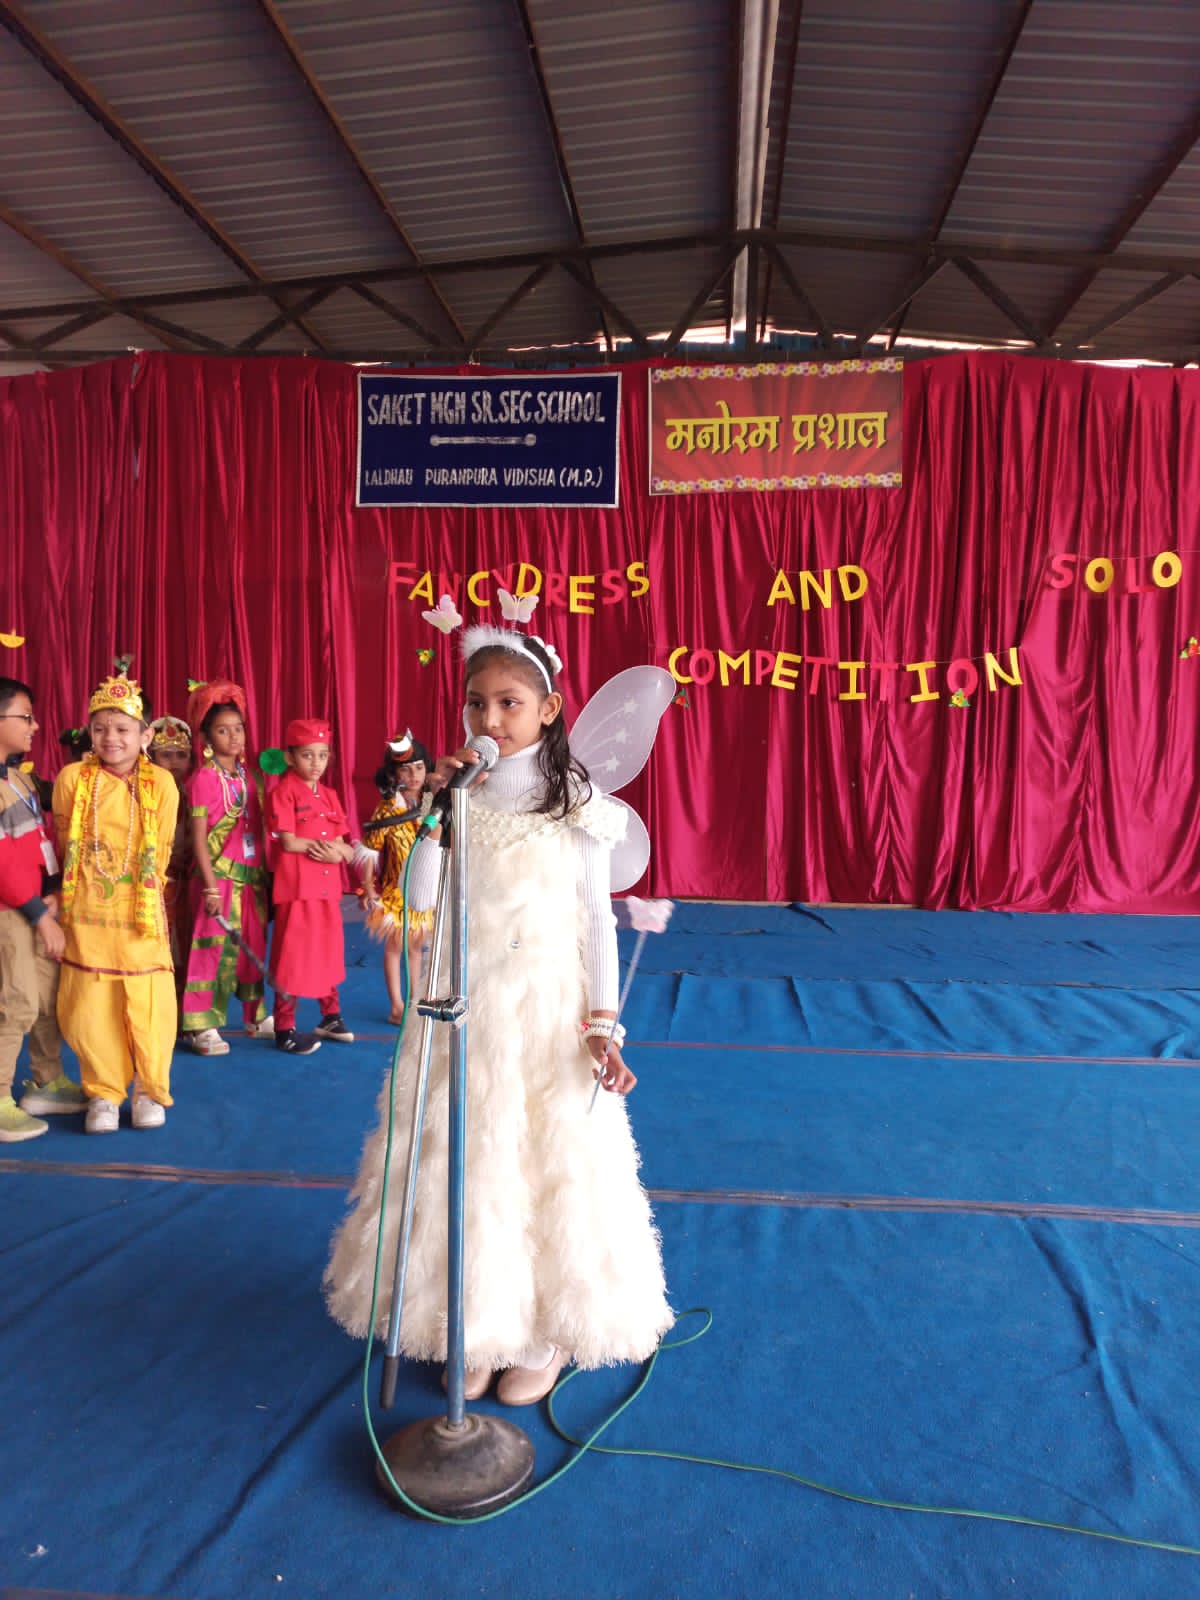  Fancy Dress and Solo Dance Competition